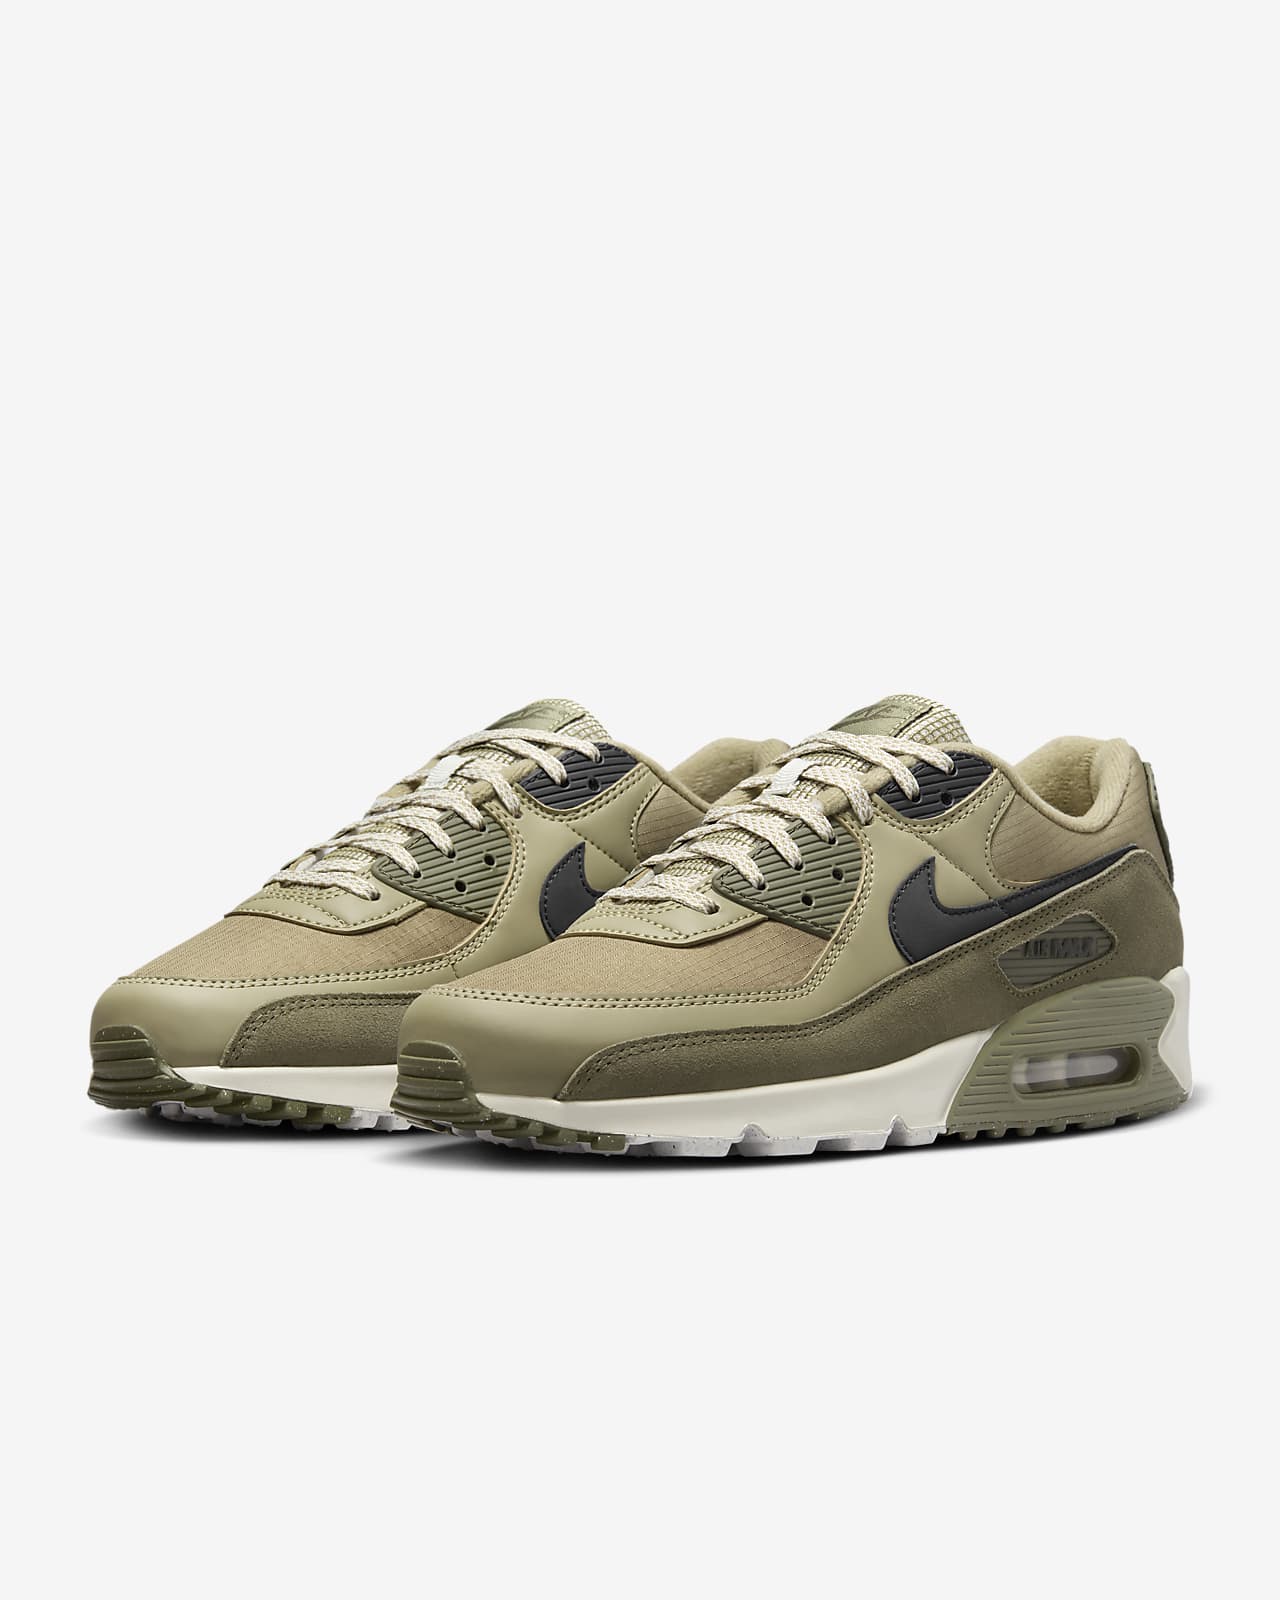 Nike Men's Air Max 90 Shoes, Size 6.5, Neutral Olive/Black